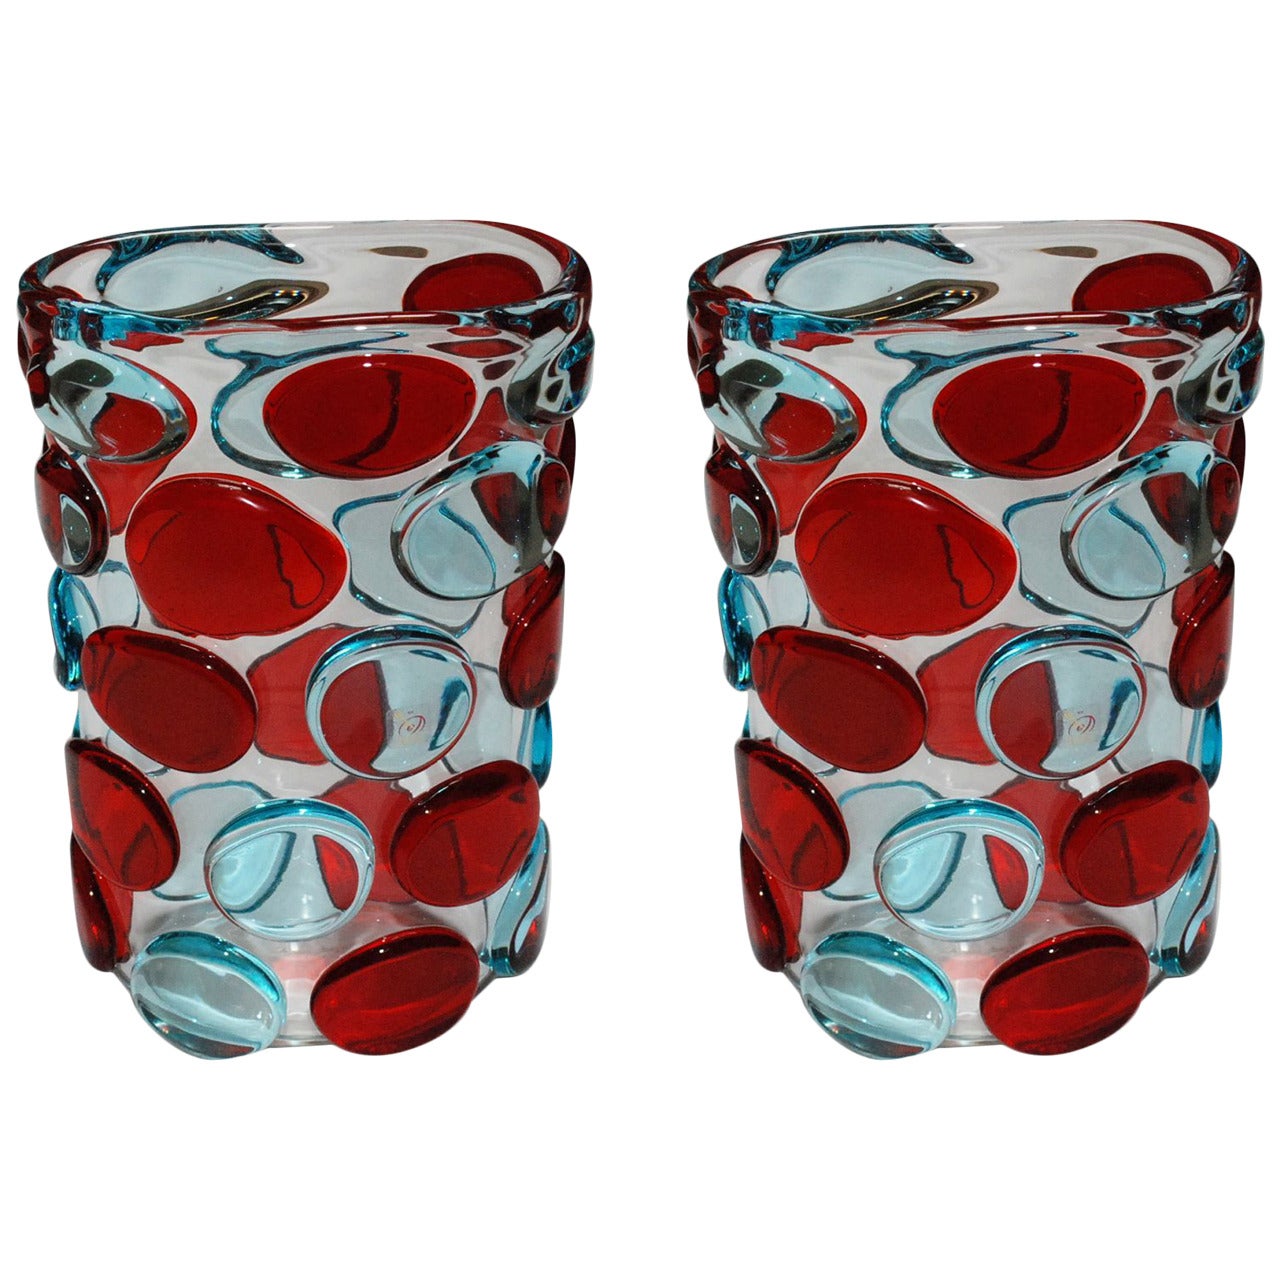 Pair of Red and Blue Button Murano Vases by Enrico Camozzo